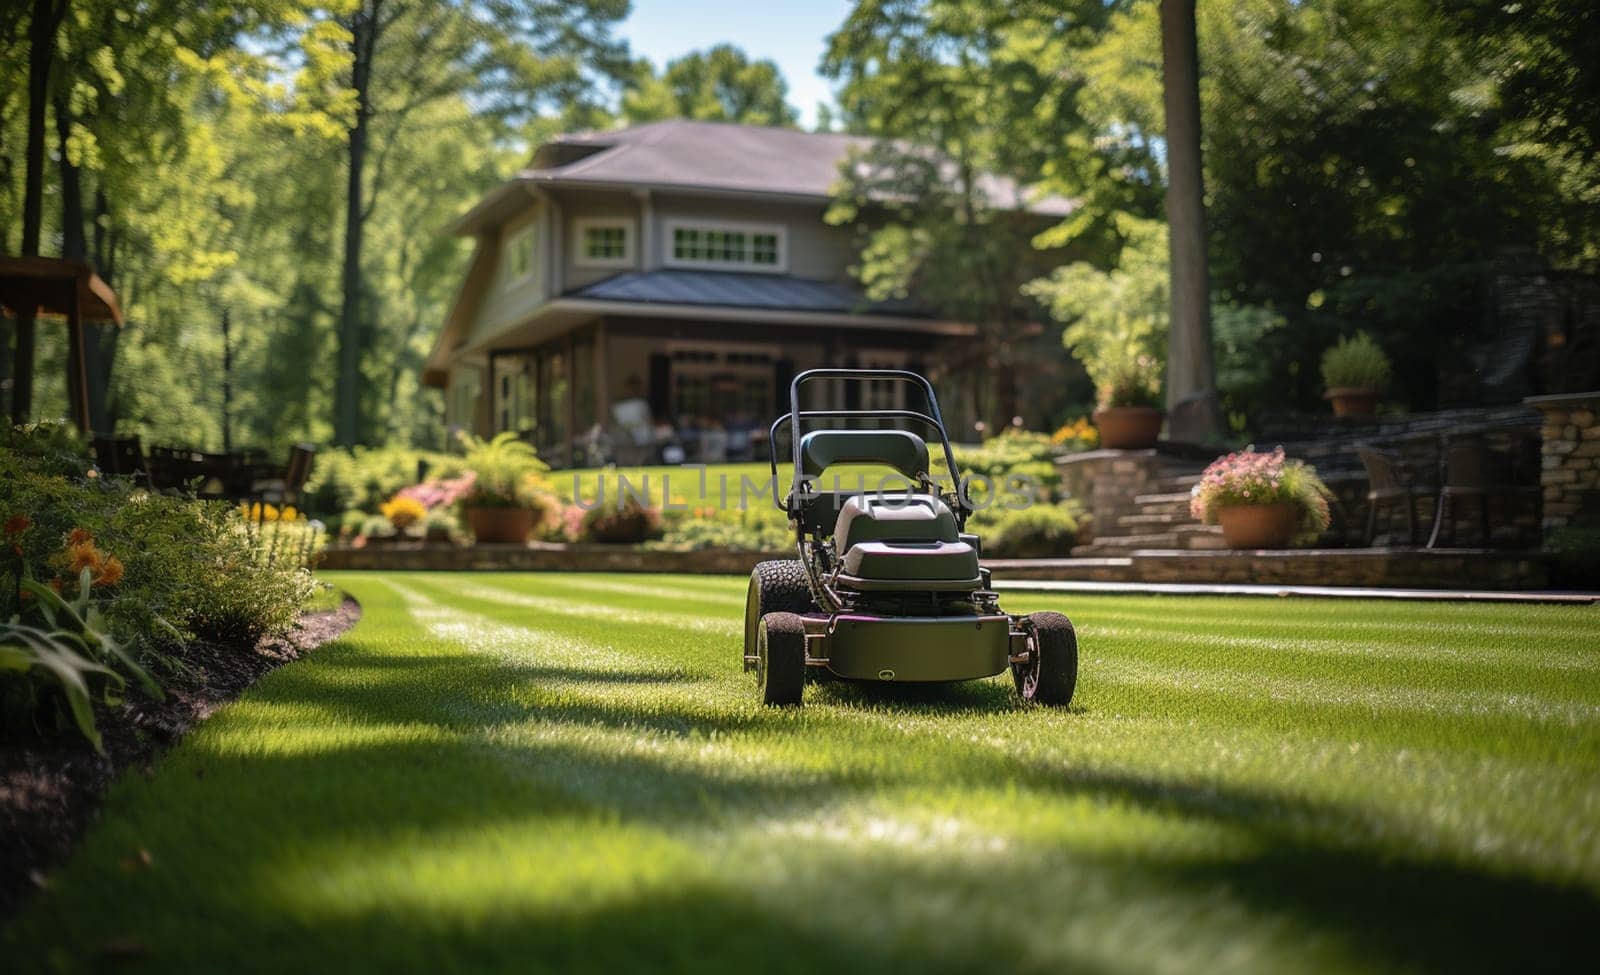 A lawn mower on a lush green lawn surrounded by flowers. The back yard of the house. High quality photo